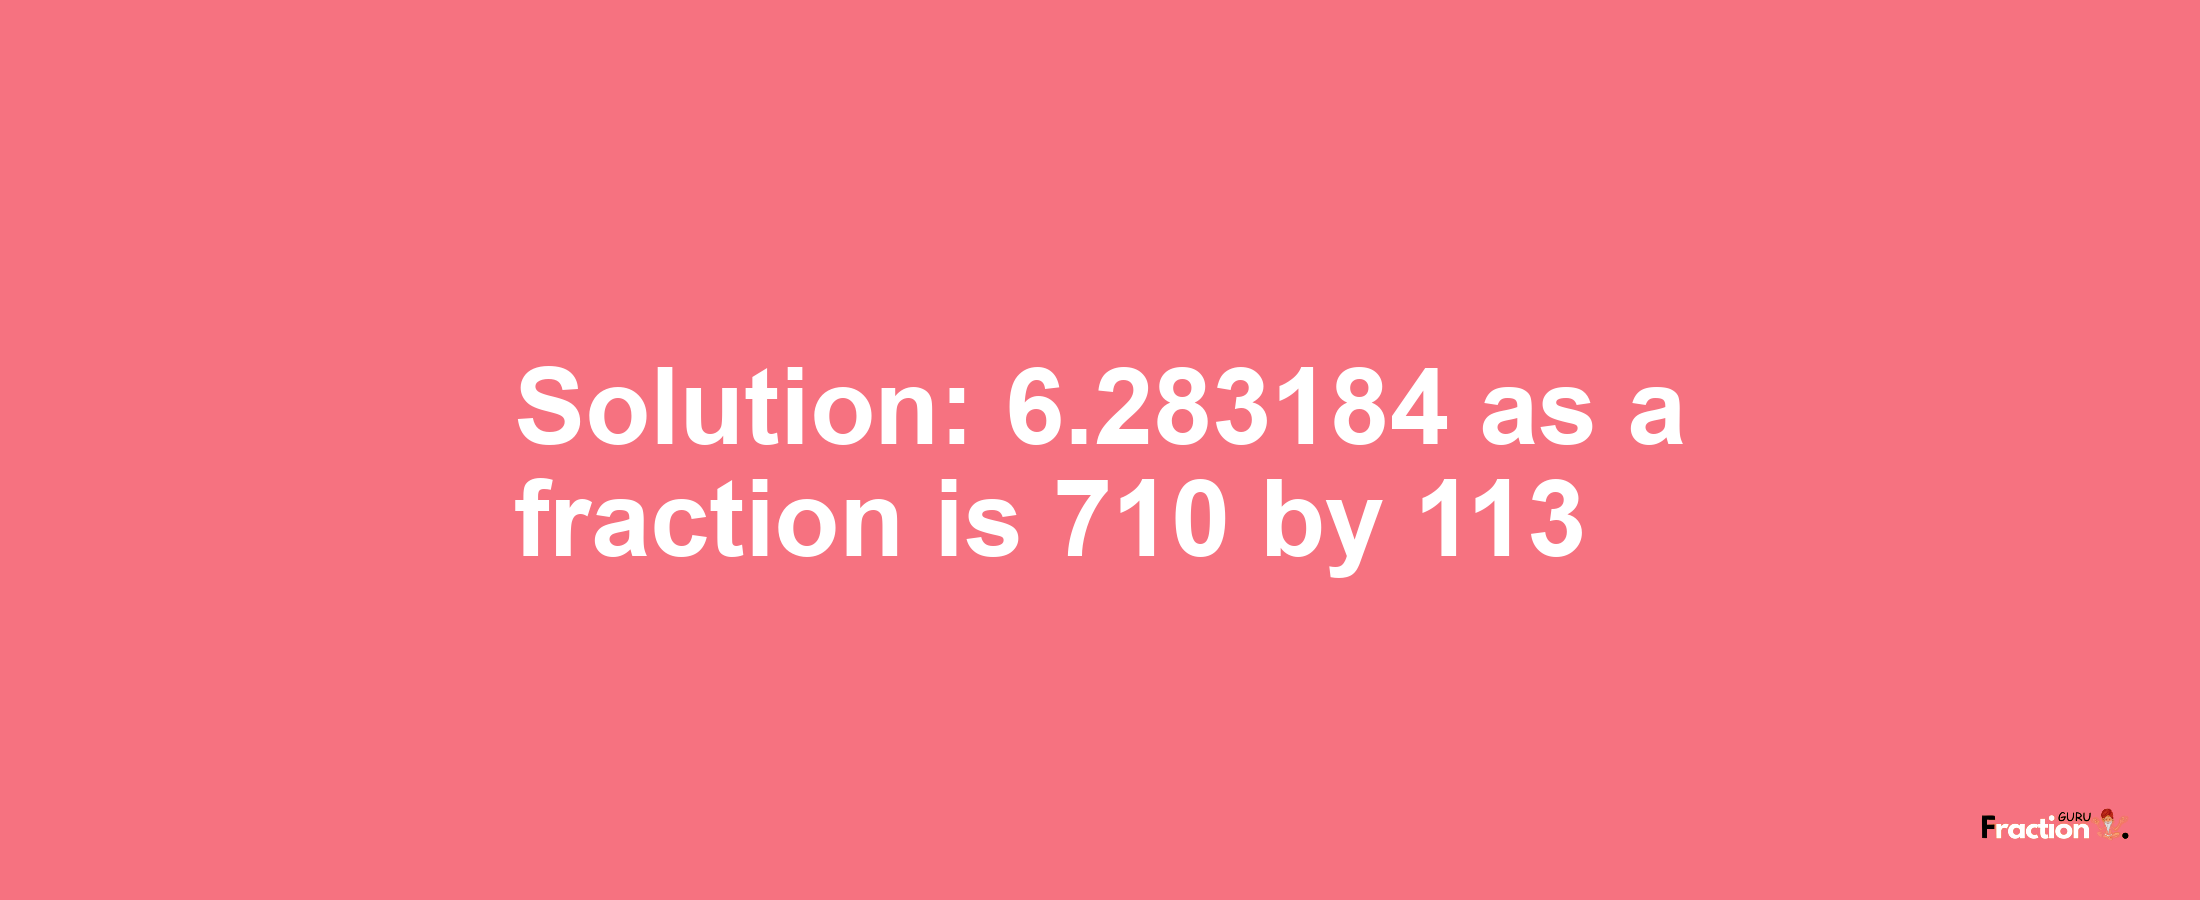 Solution:6.283184 as a fraction is 710/113